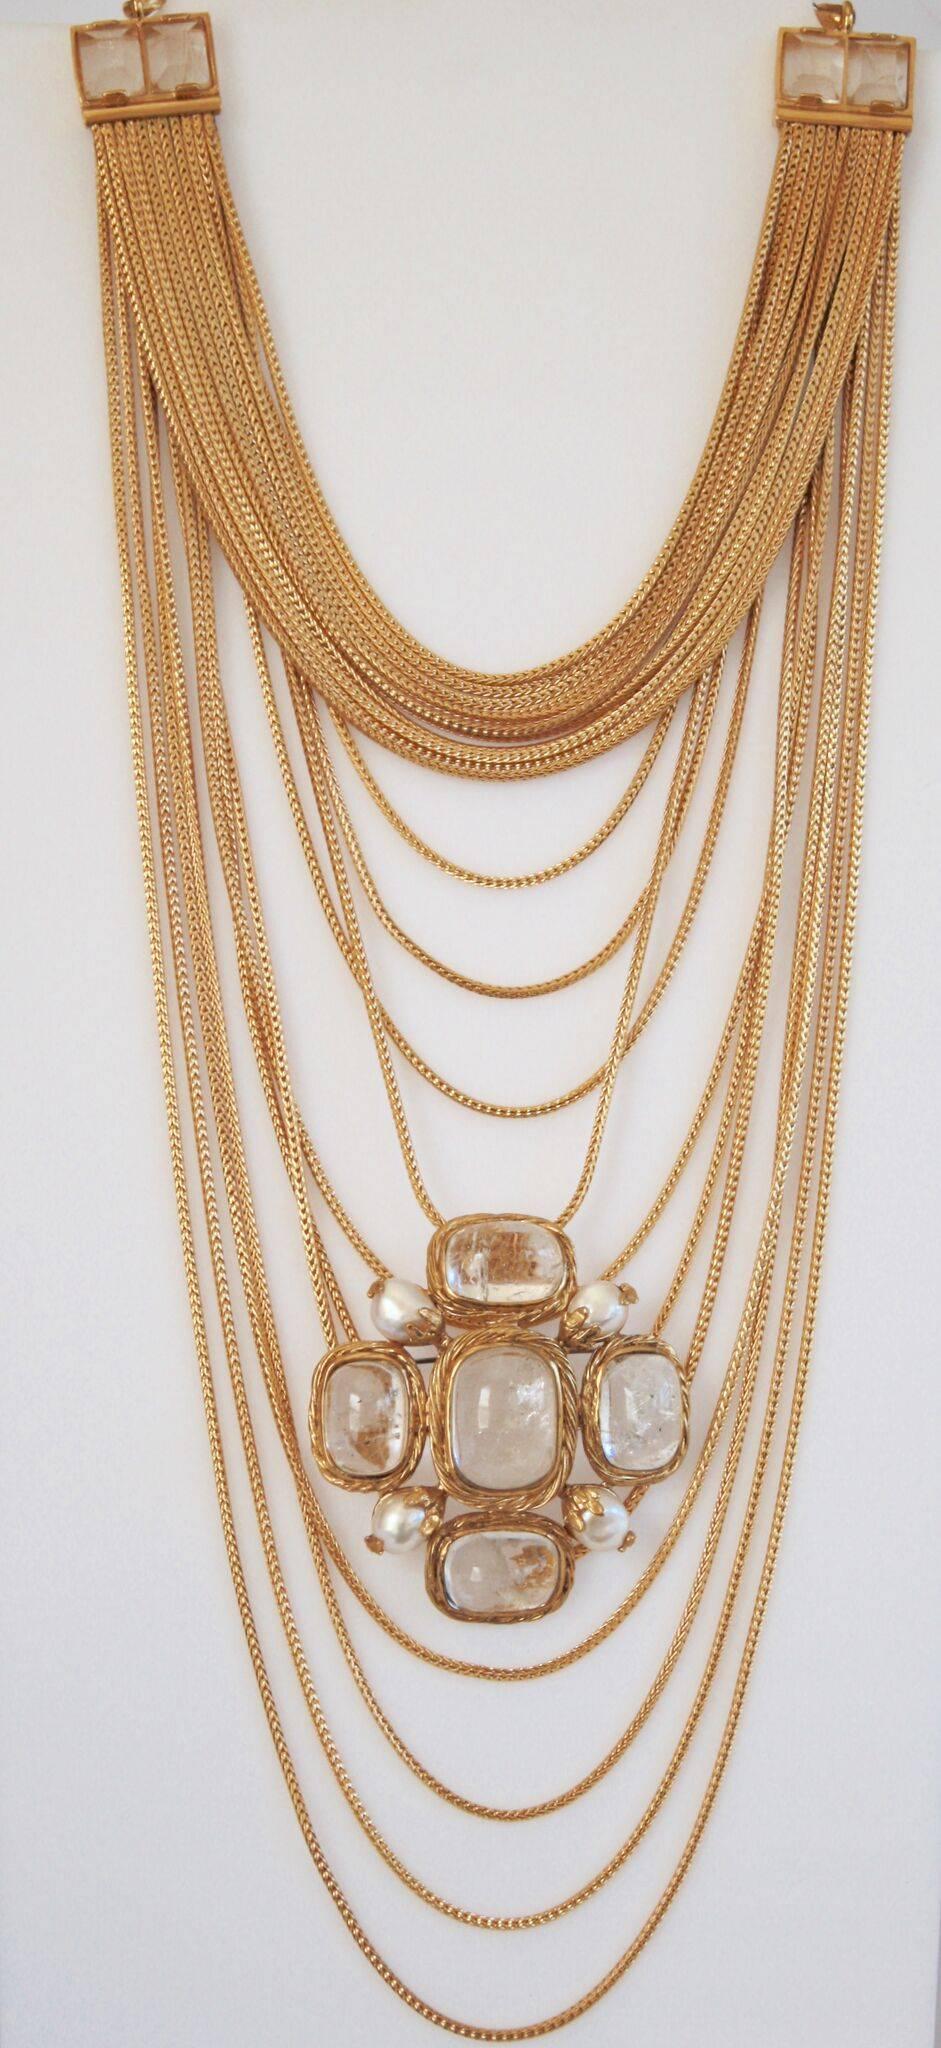 Goossens Paris gilded brass multi chain necklace with rock crystal detailing. The chains are a gorgeous shade of gold and are made to hold decorative pins (sold separately). 

First layer of necklace is 13